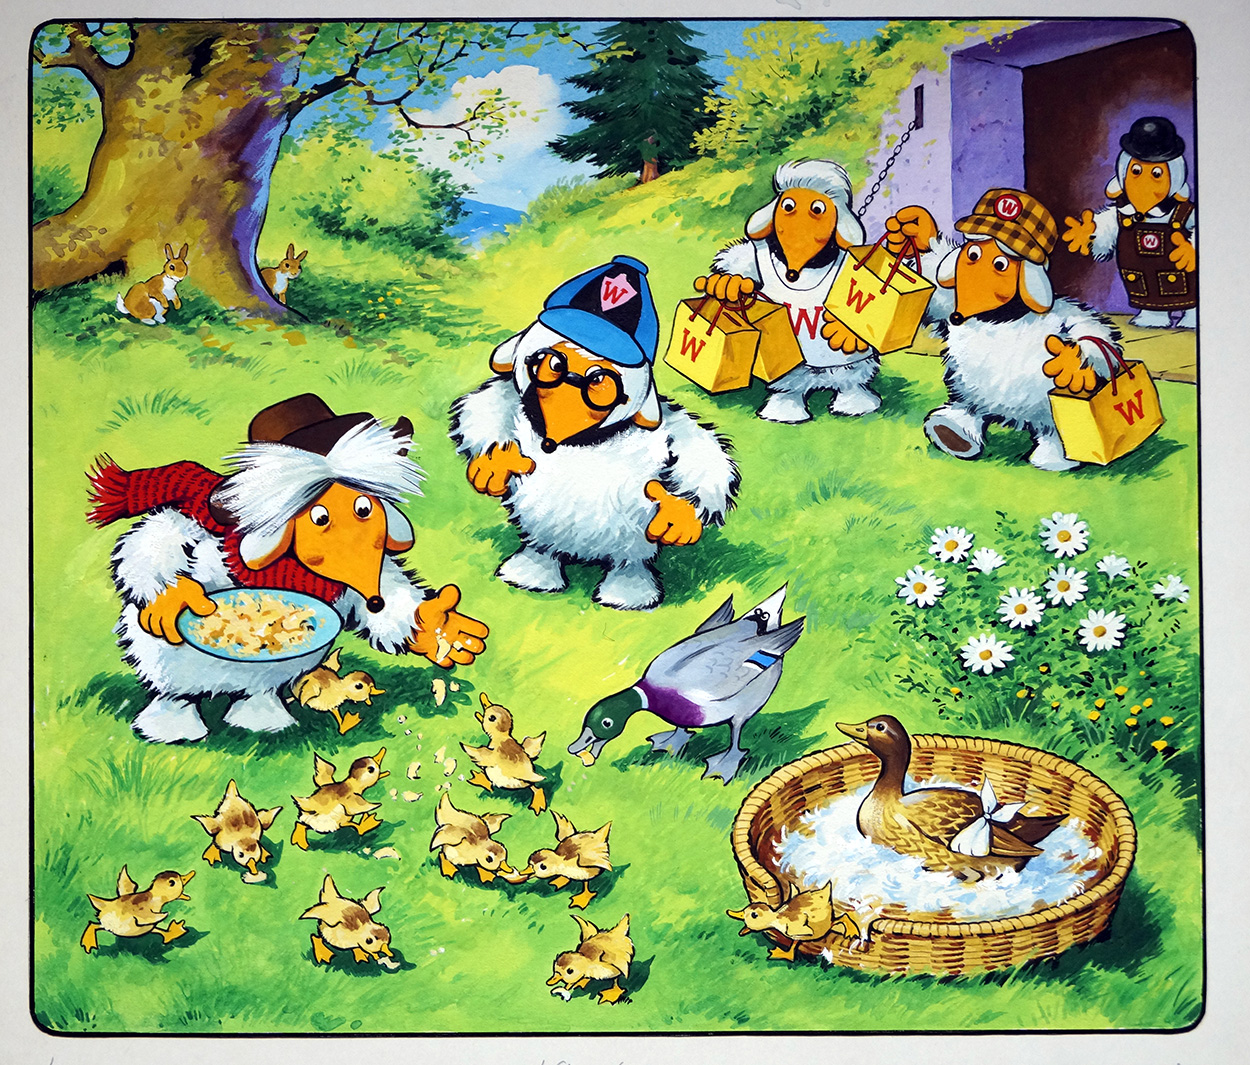 The Wombles: Ducks Go A-Dabbling (TWO pages) (Originals) art by The Wombles (Blasco) at The Illustration Art Gallery